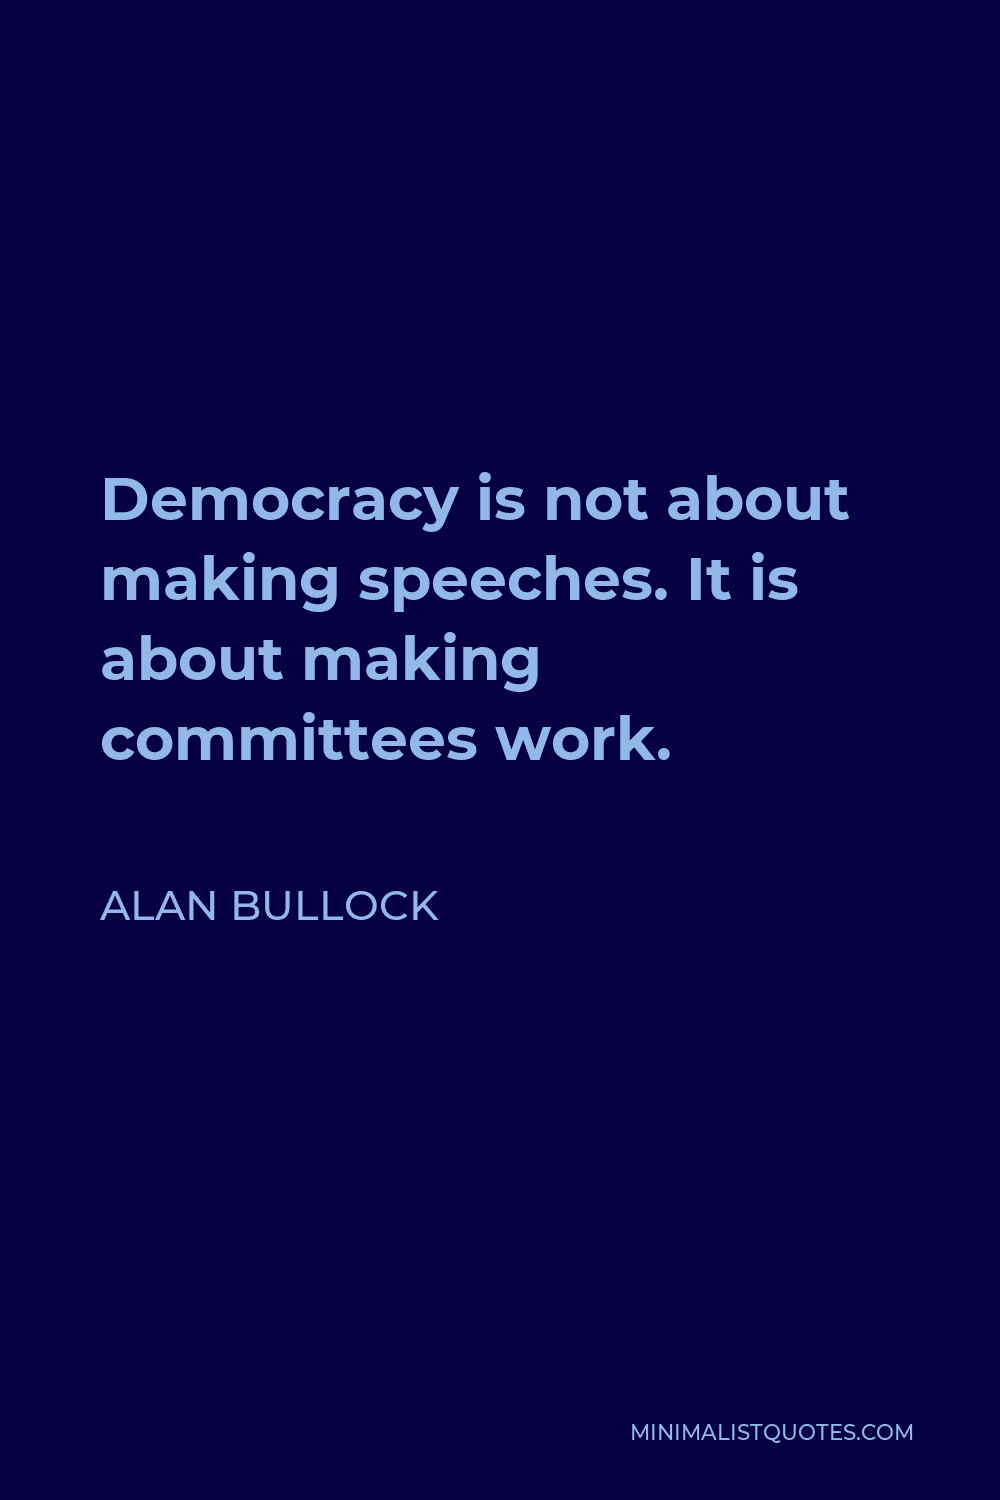 Alan Bullock Quote - Democracy is not about making speeches. It is about making committees work.